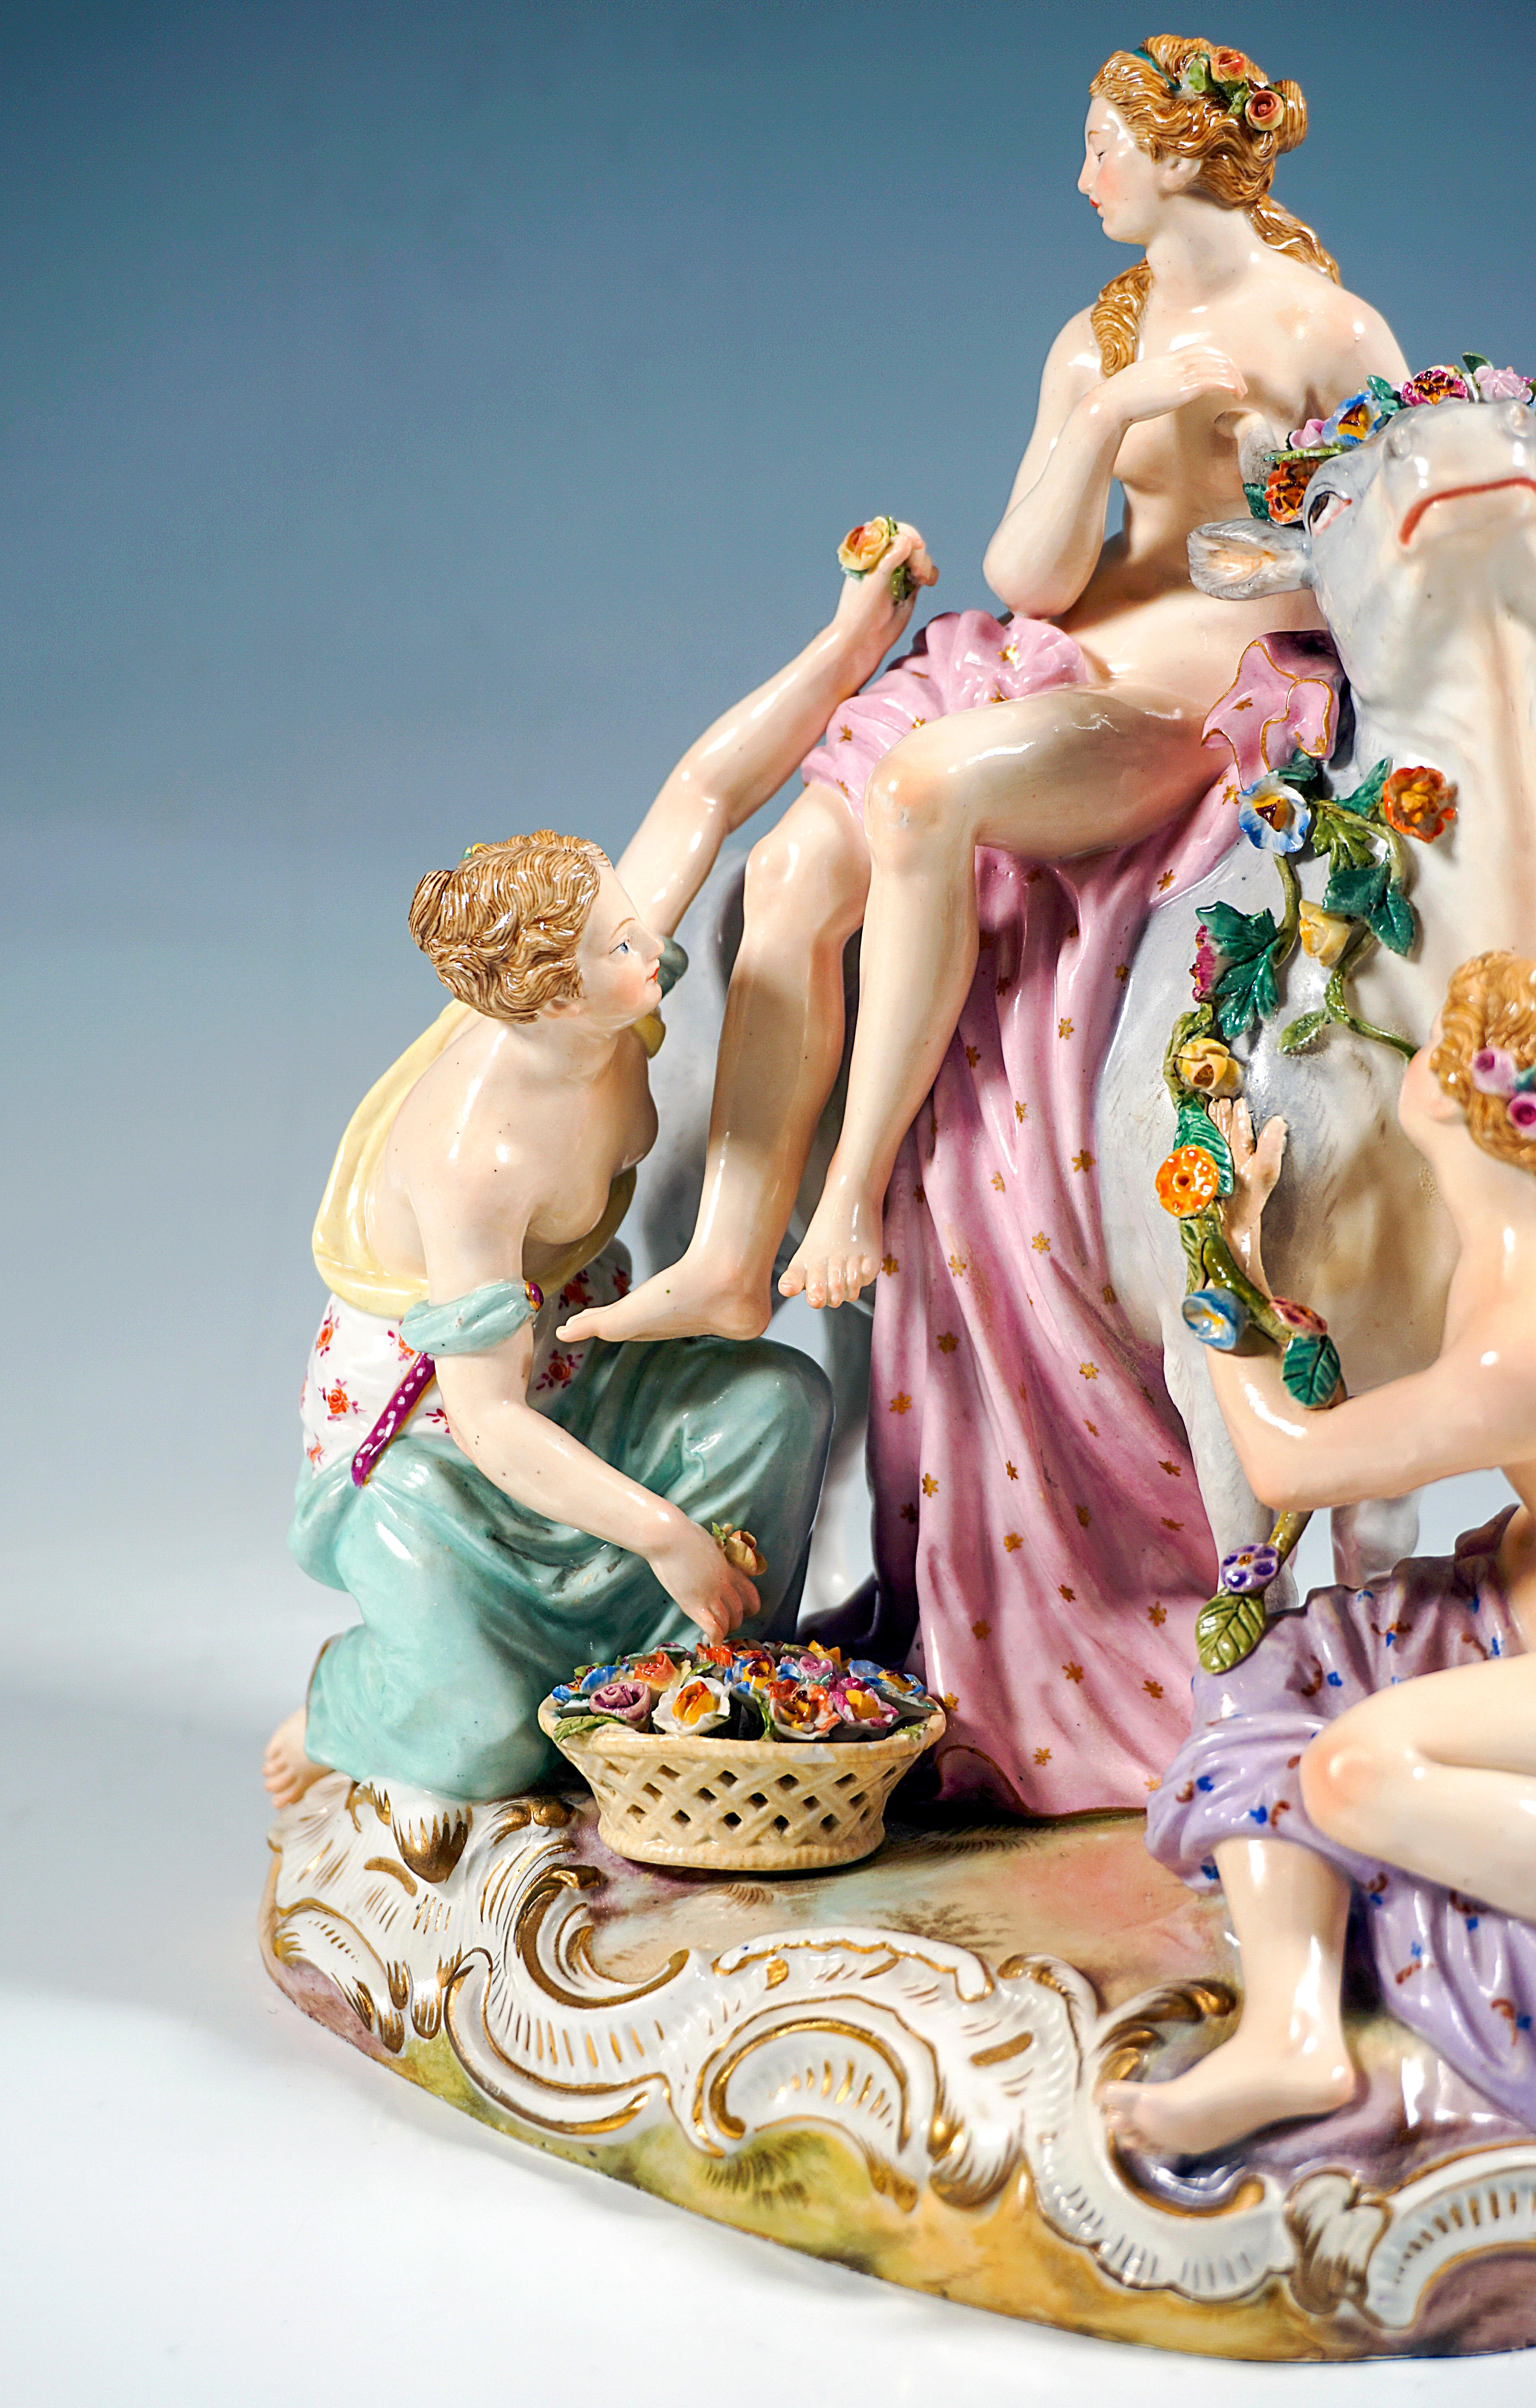 Rococo Meissen Porcelain Group 'Europe on the Bull', by J.F. Eberlein, circa 1860